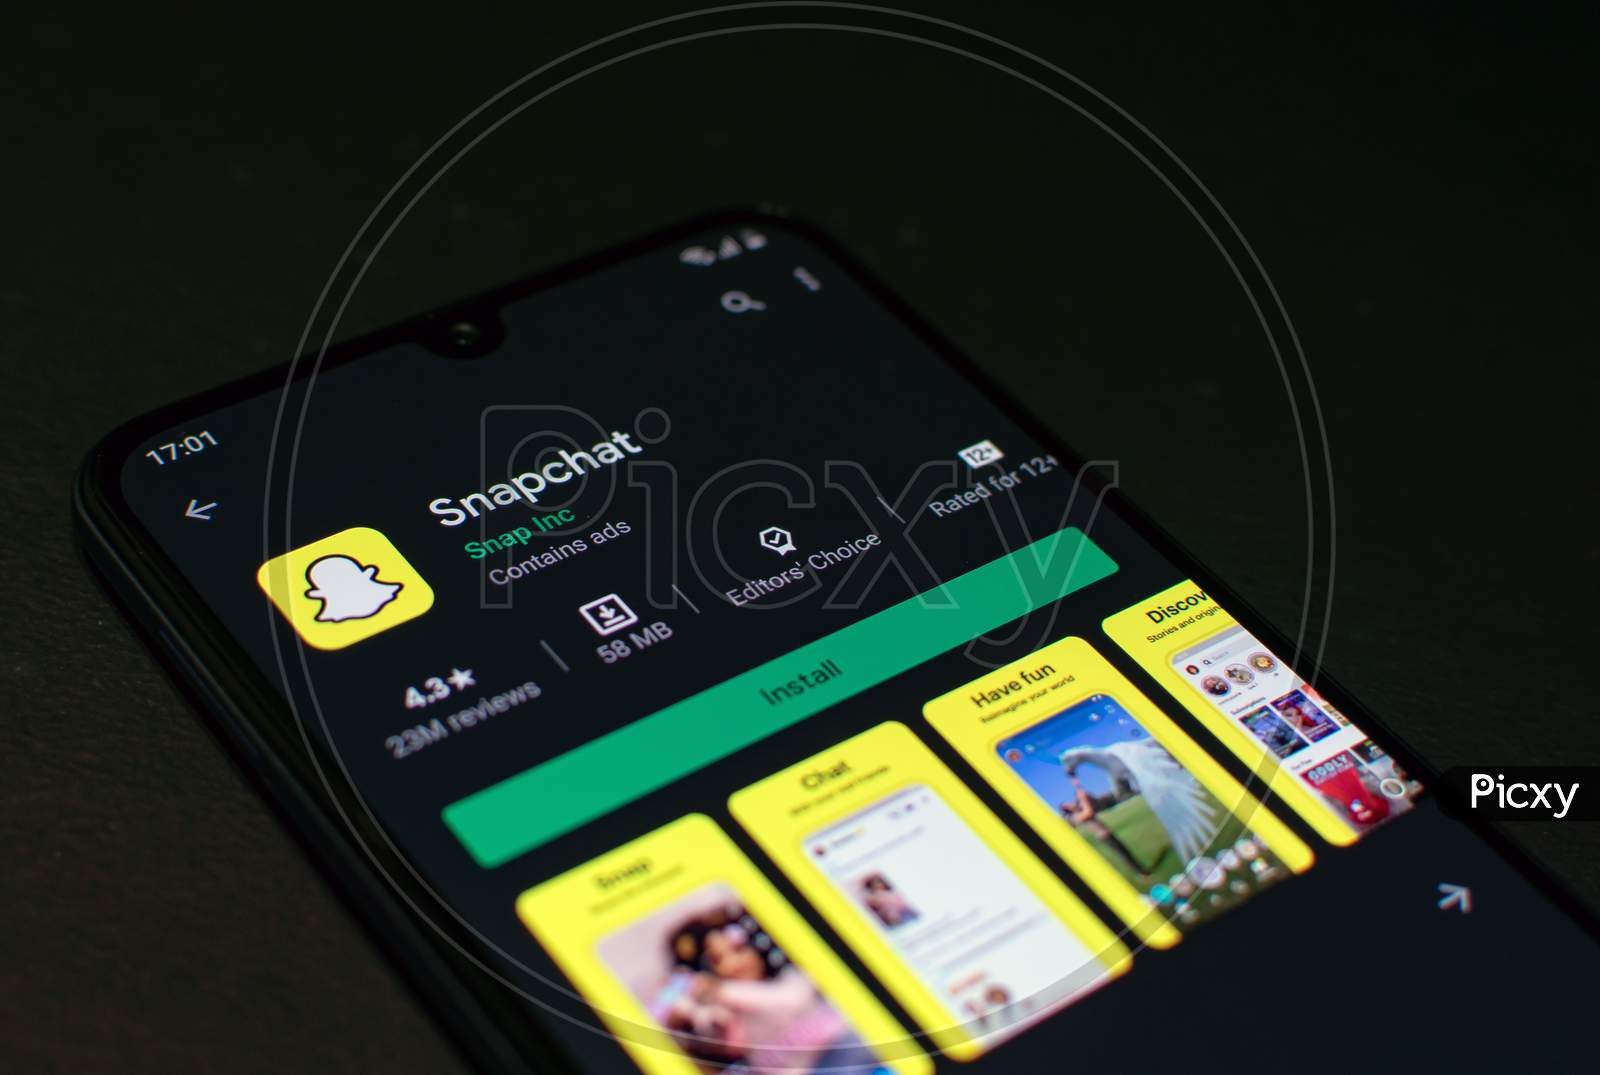 Snapchat application on Smartphone screen. This Social Network app is a freeware in Android Playstore developed by Snap Inc